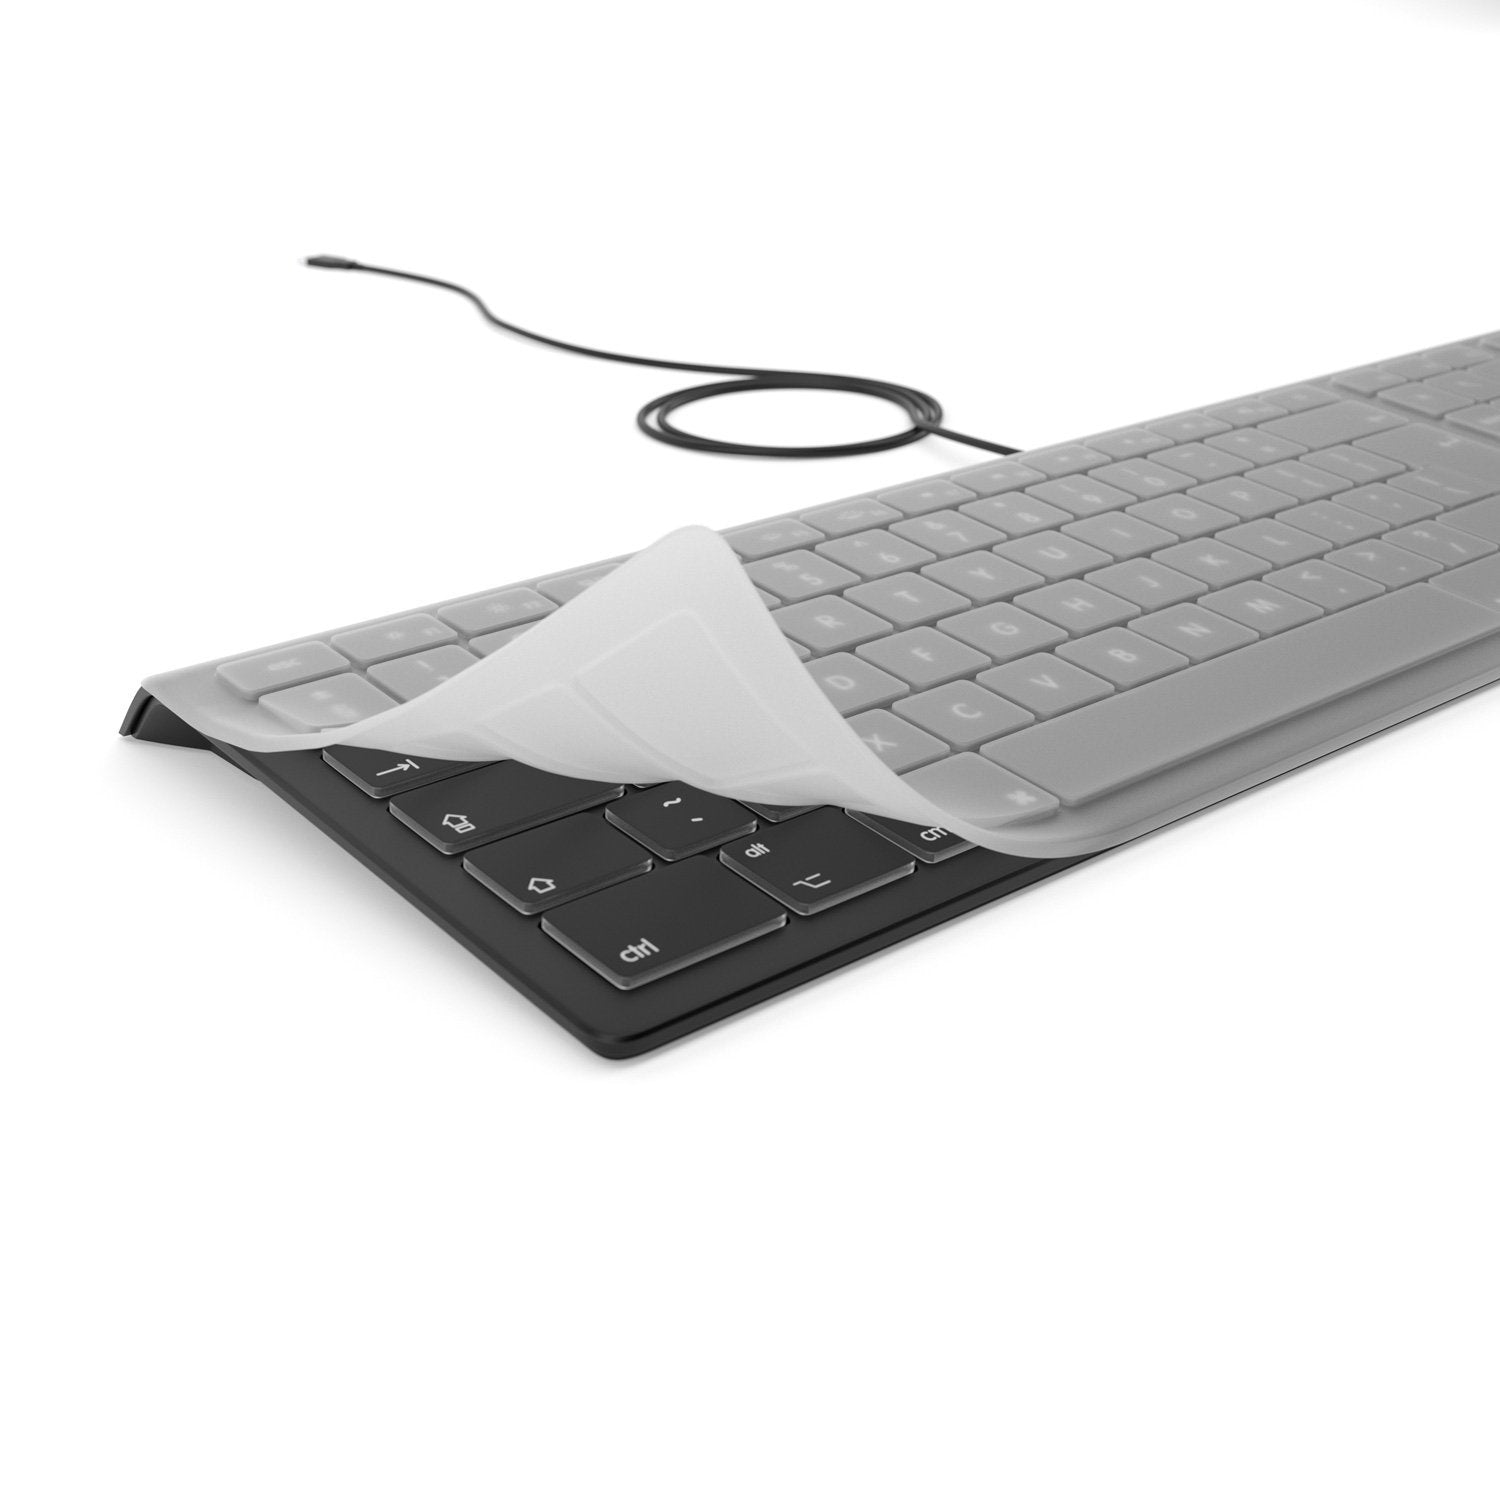 Clear Protection Cover for Backlit Keyboard - Editors Keys